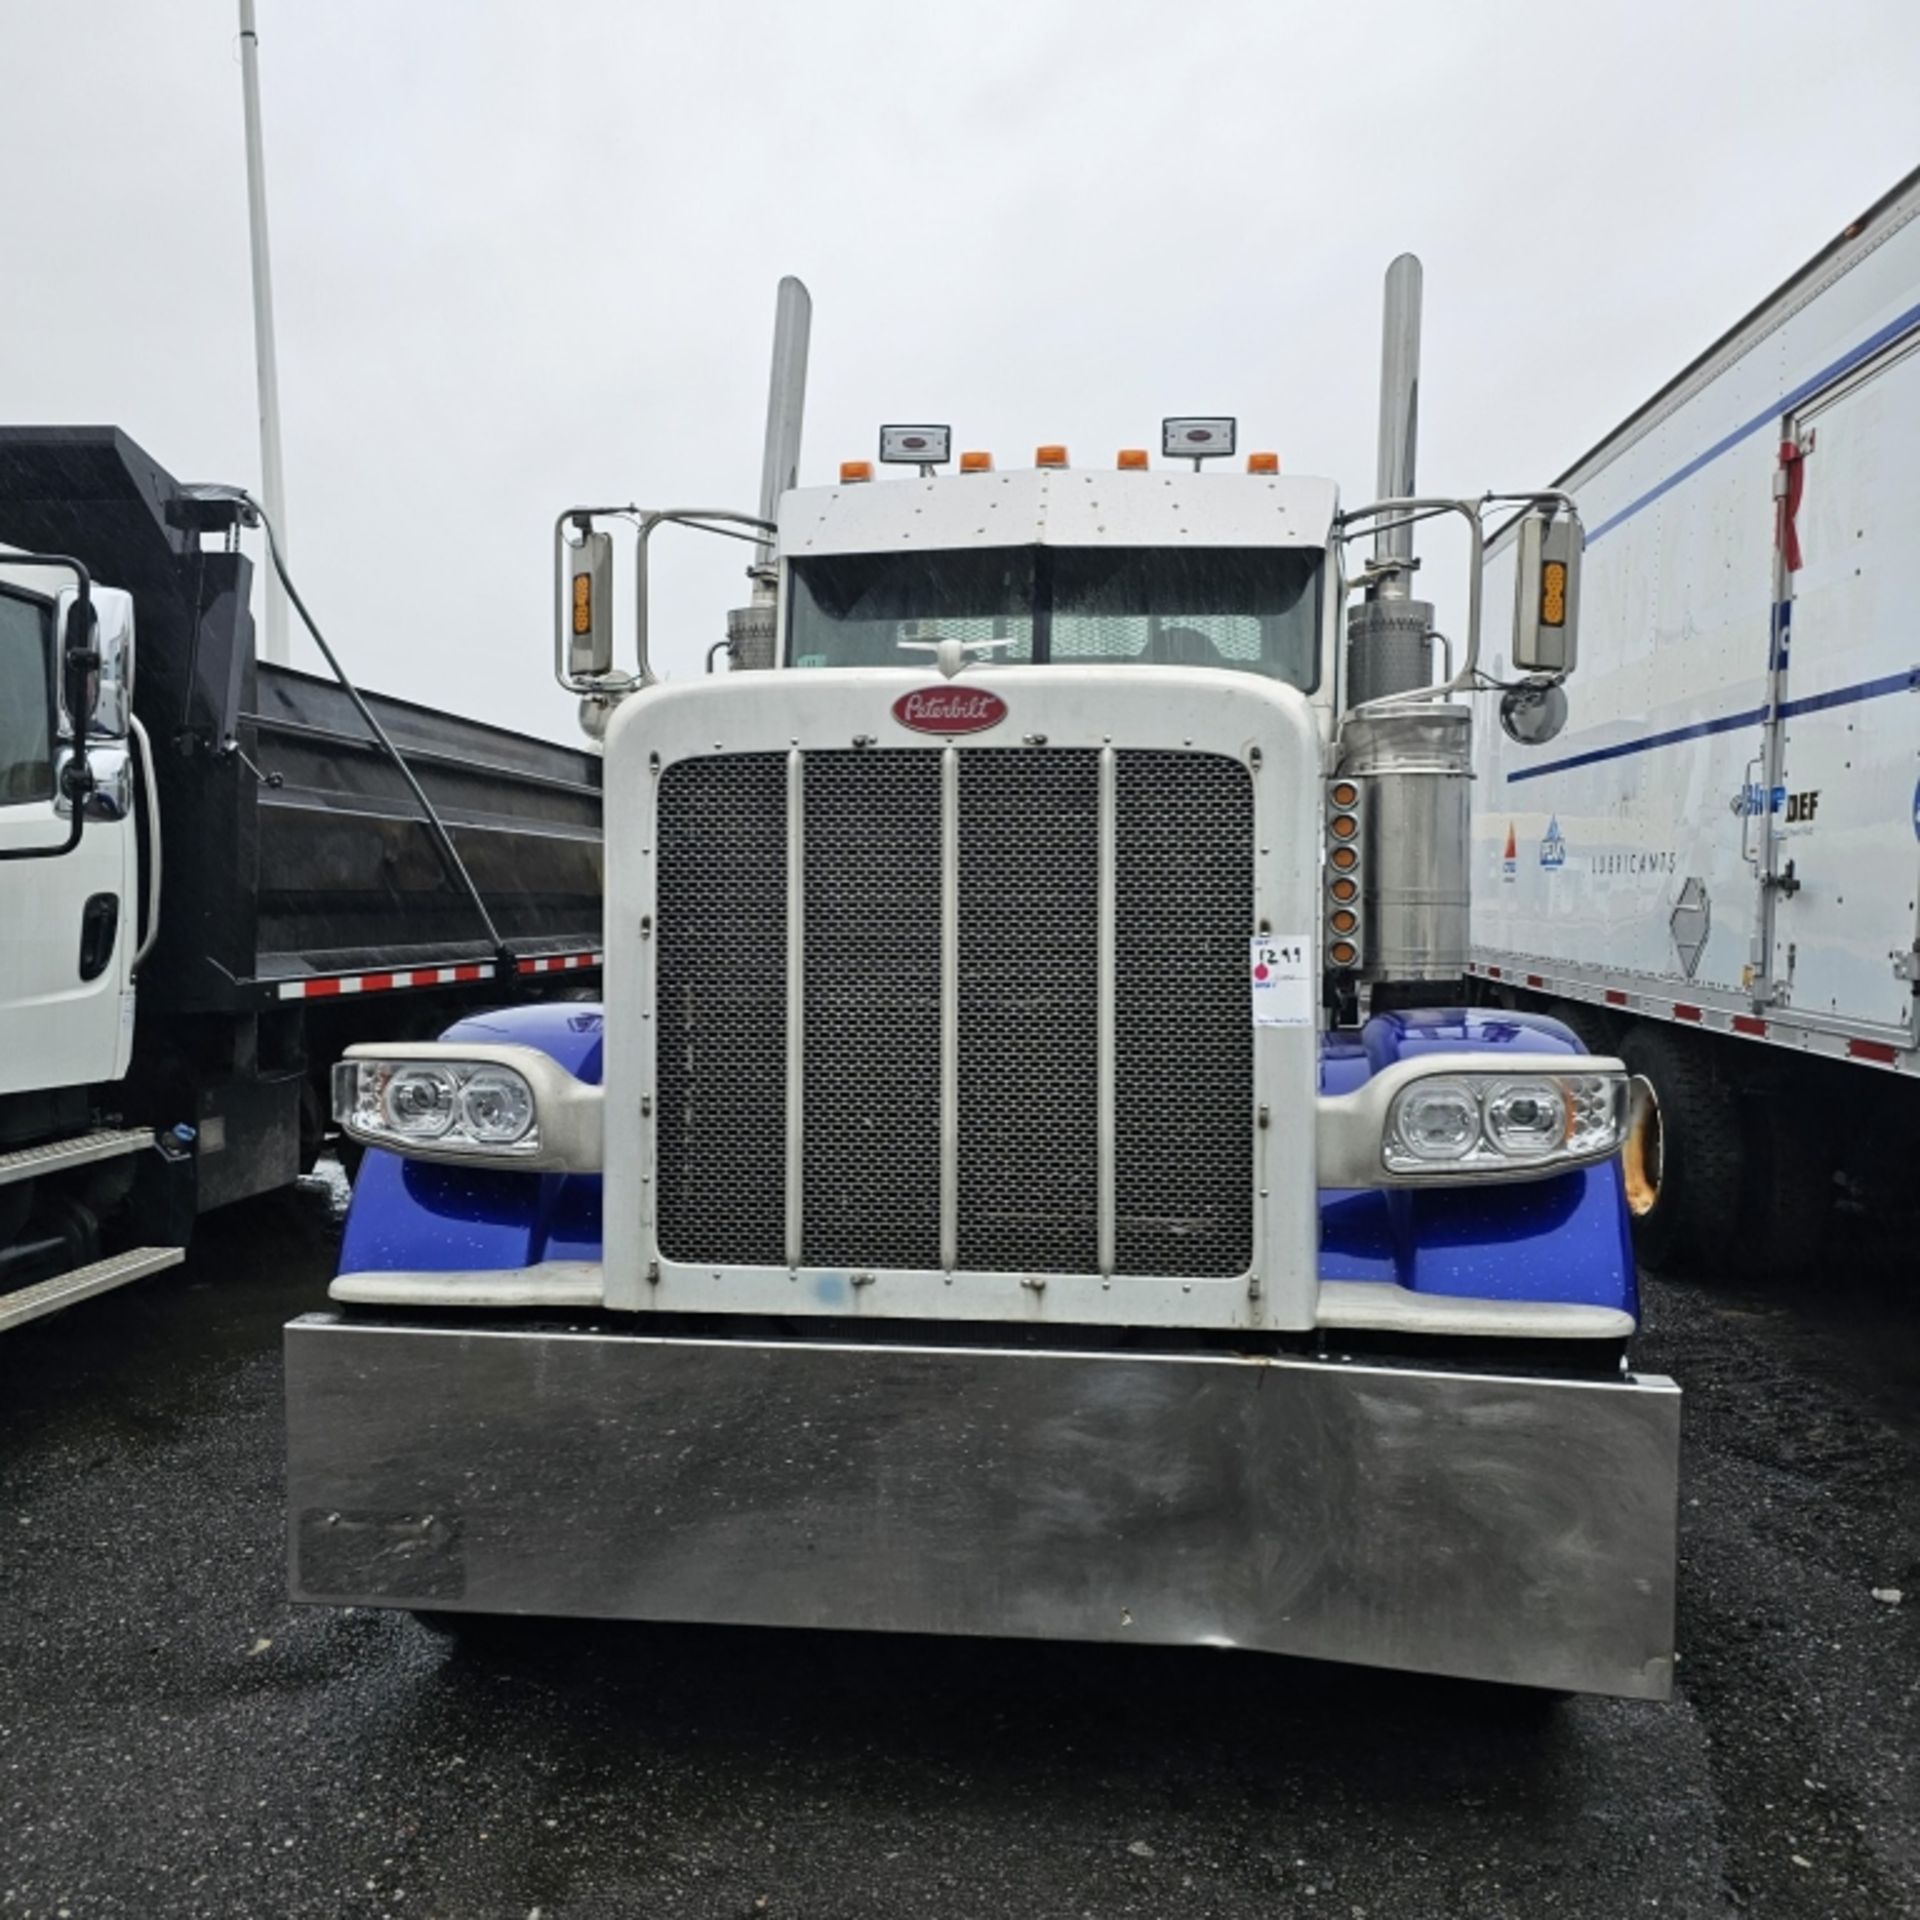 2008 Peterbilt Tractor With Winch - Image 3 of 14